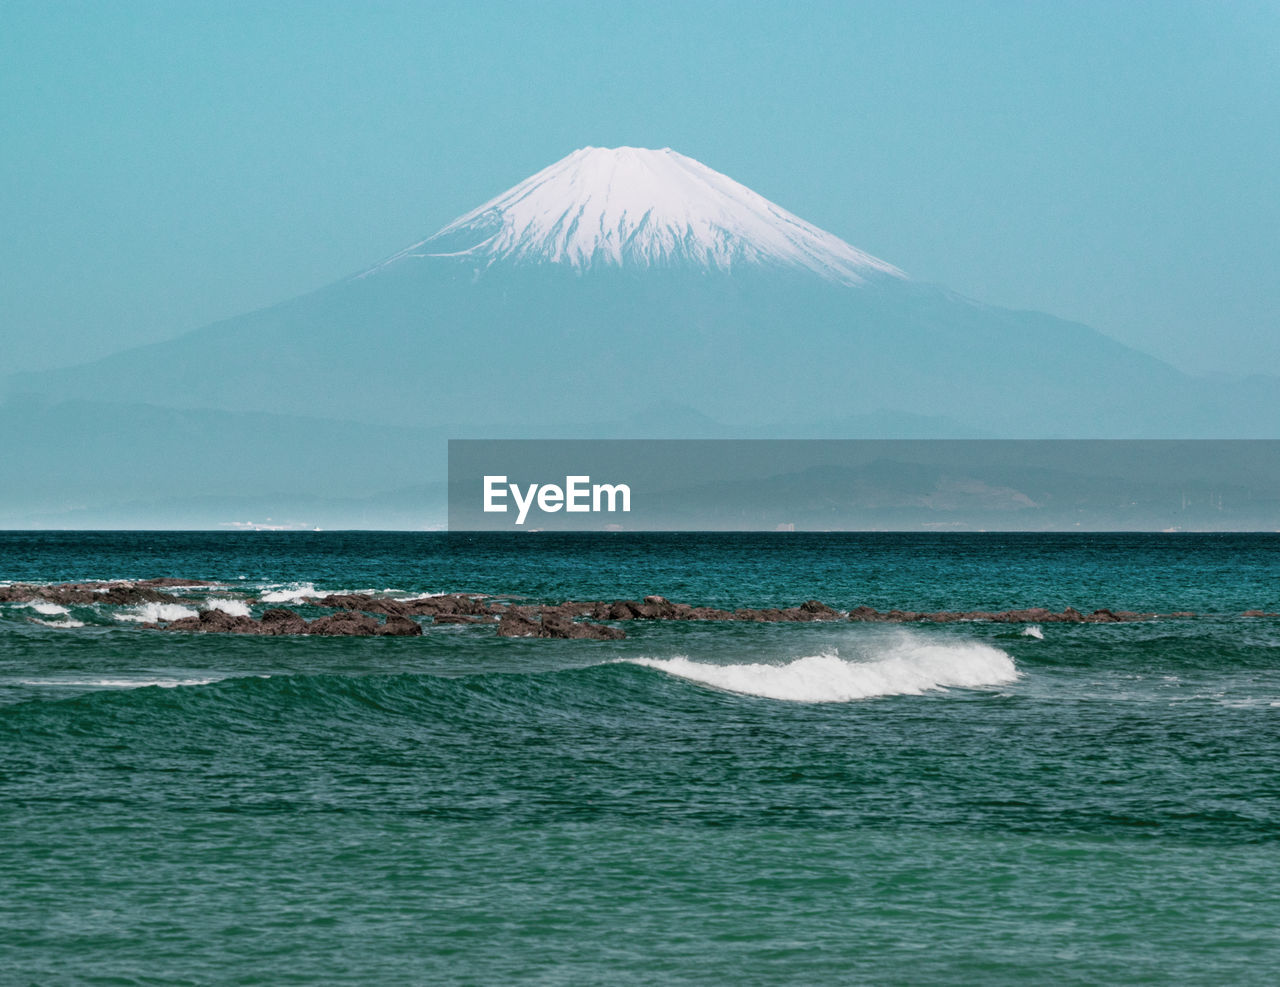 Scenic view of mt. fuji against hazy summer sky and ocean with waves in foreground.